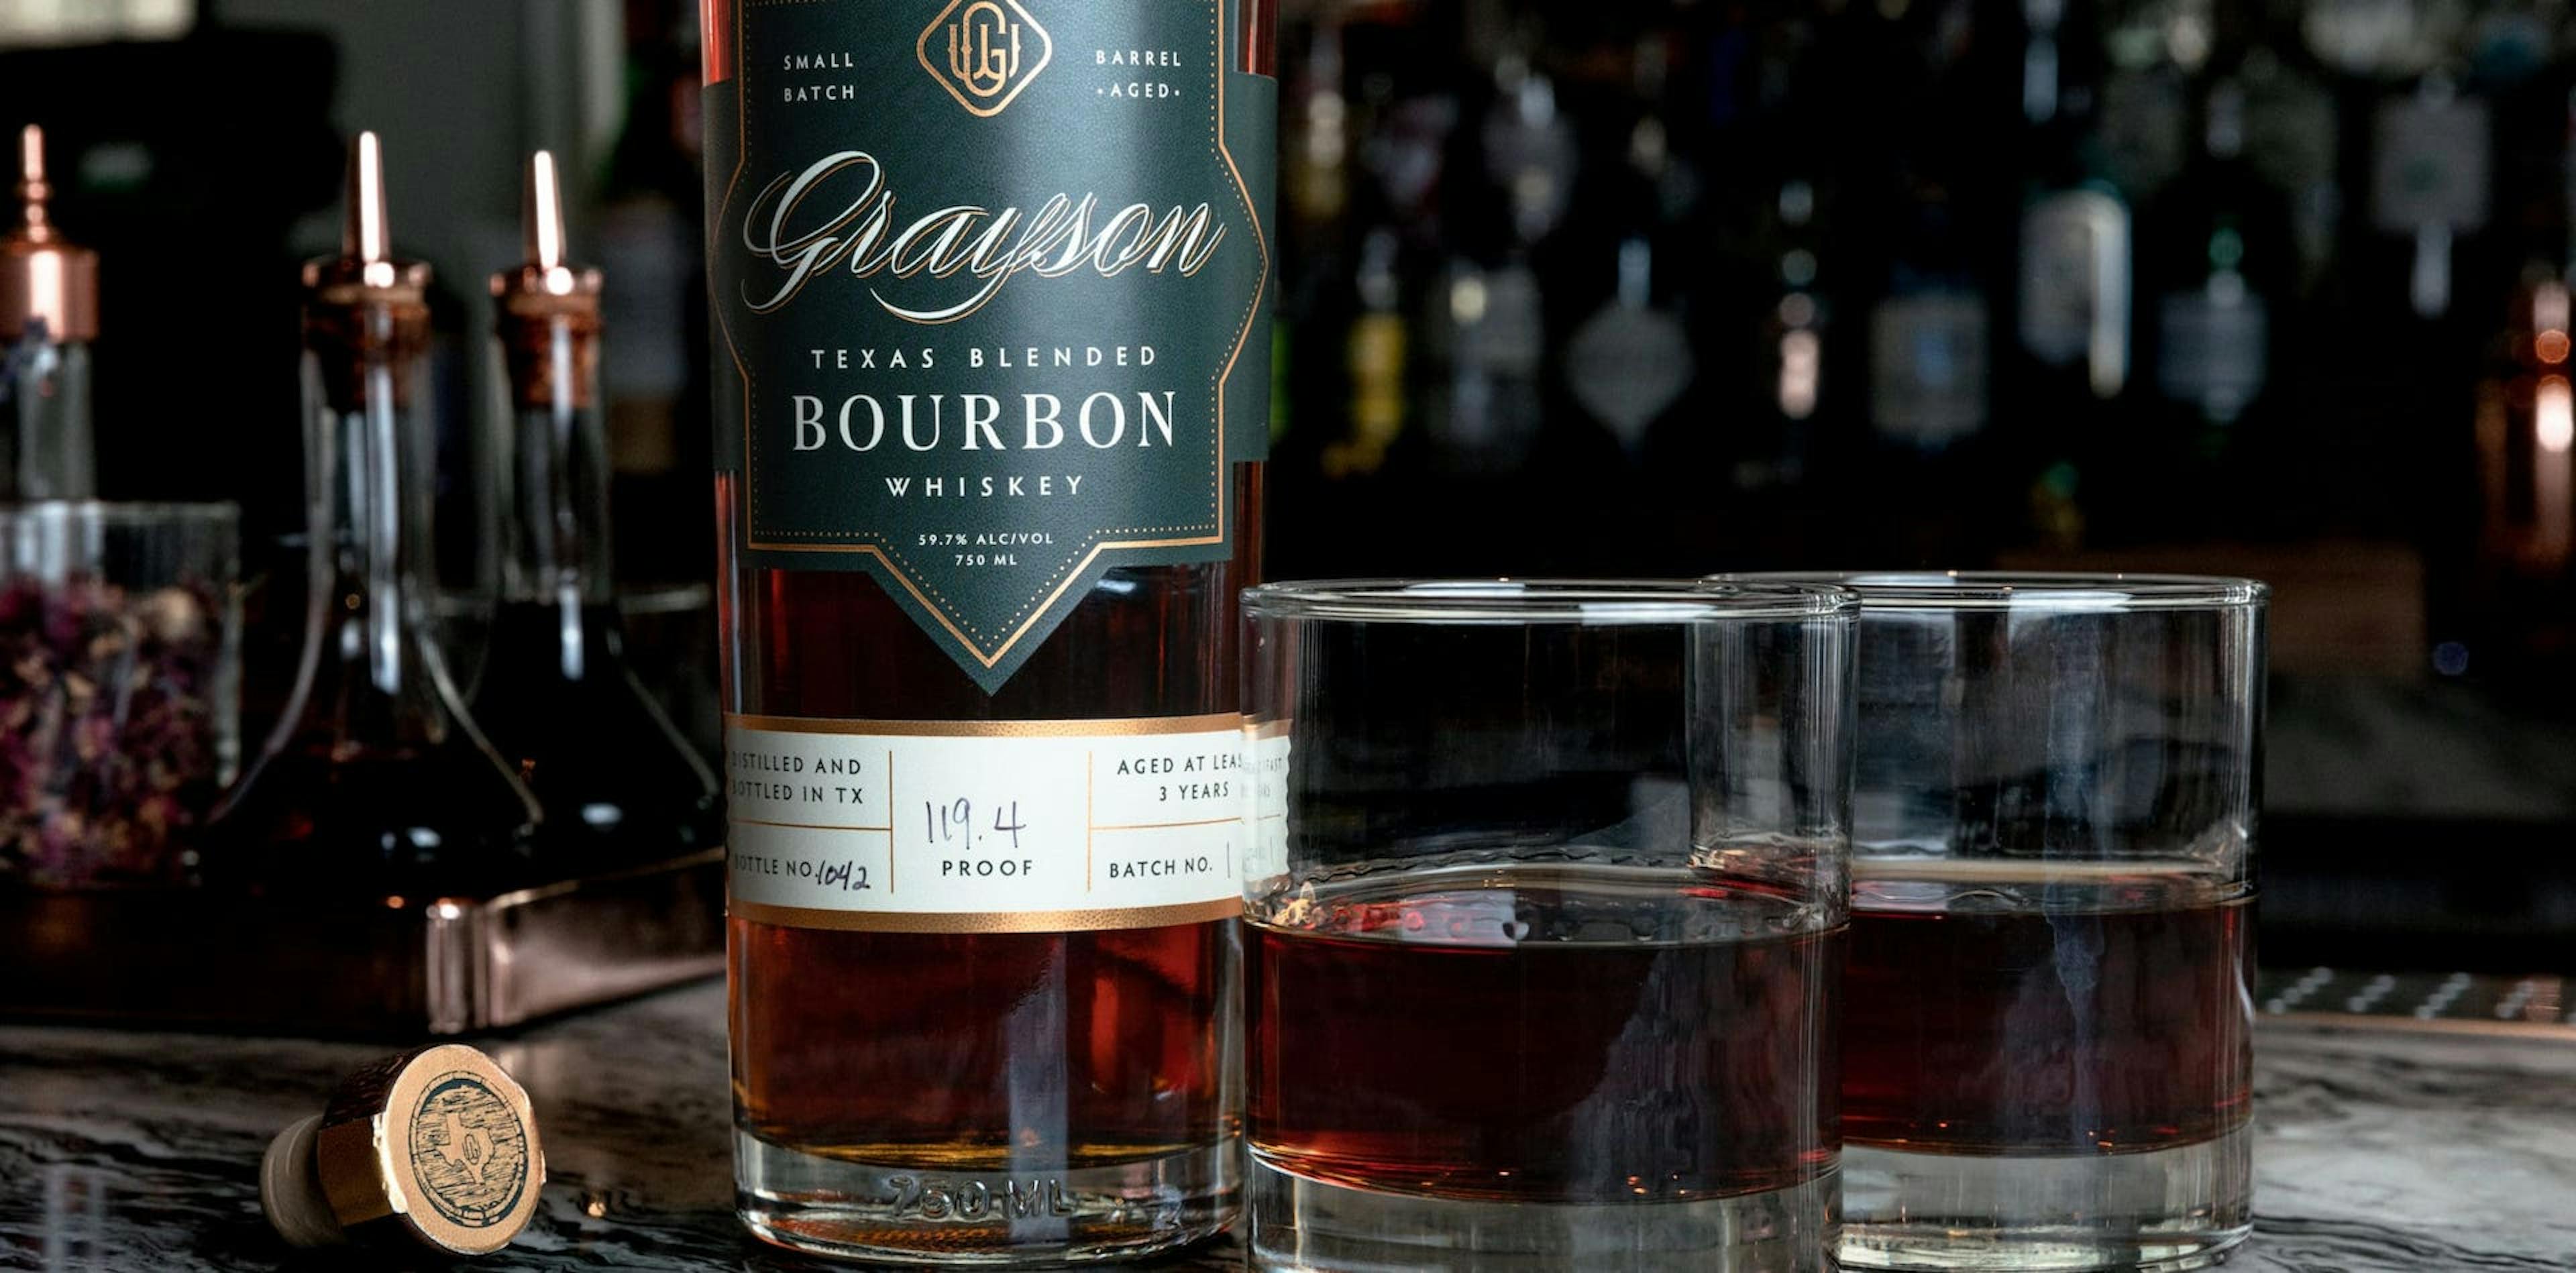 Grayson Whiskey bottle with two glasses of whiskey on bar top